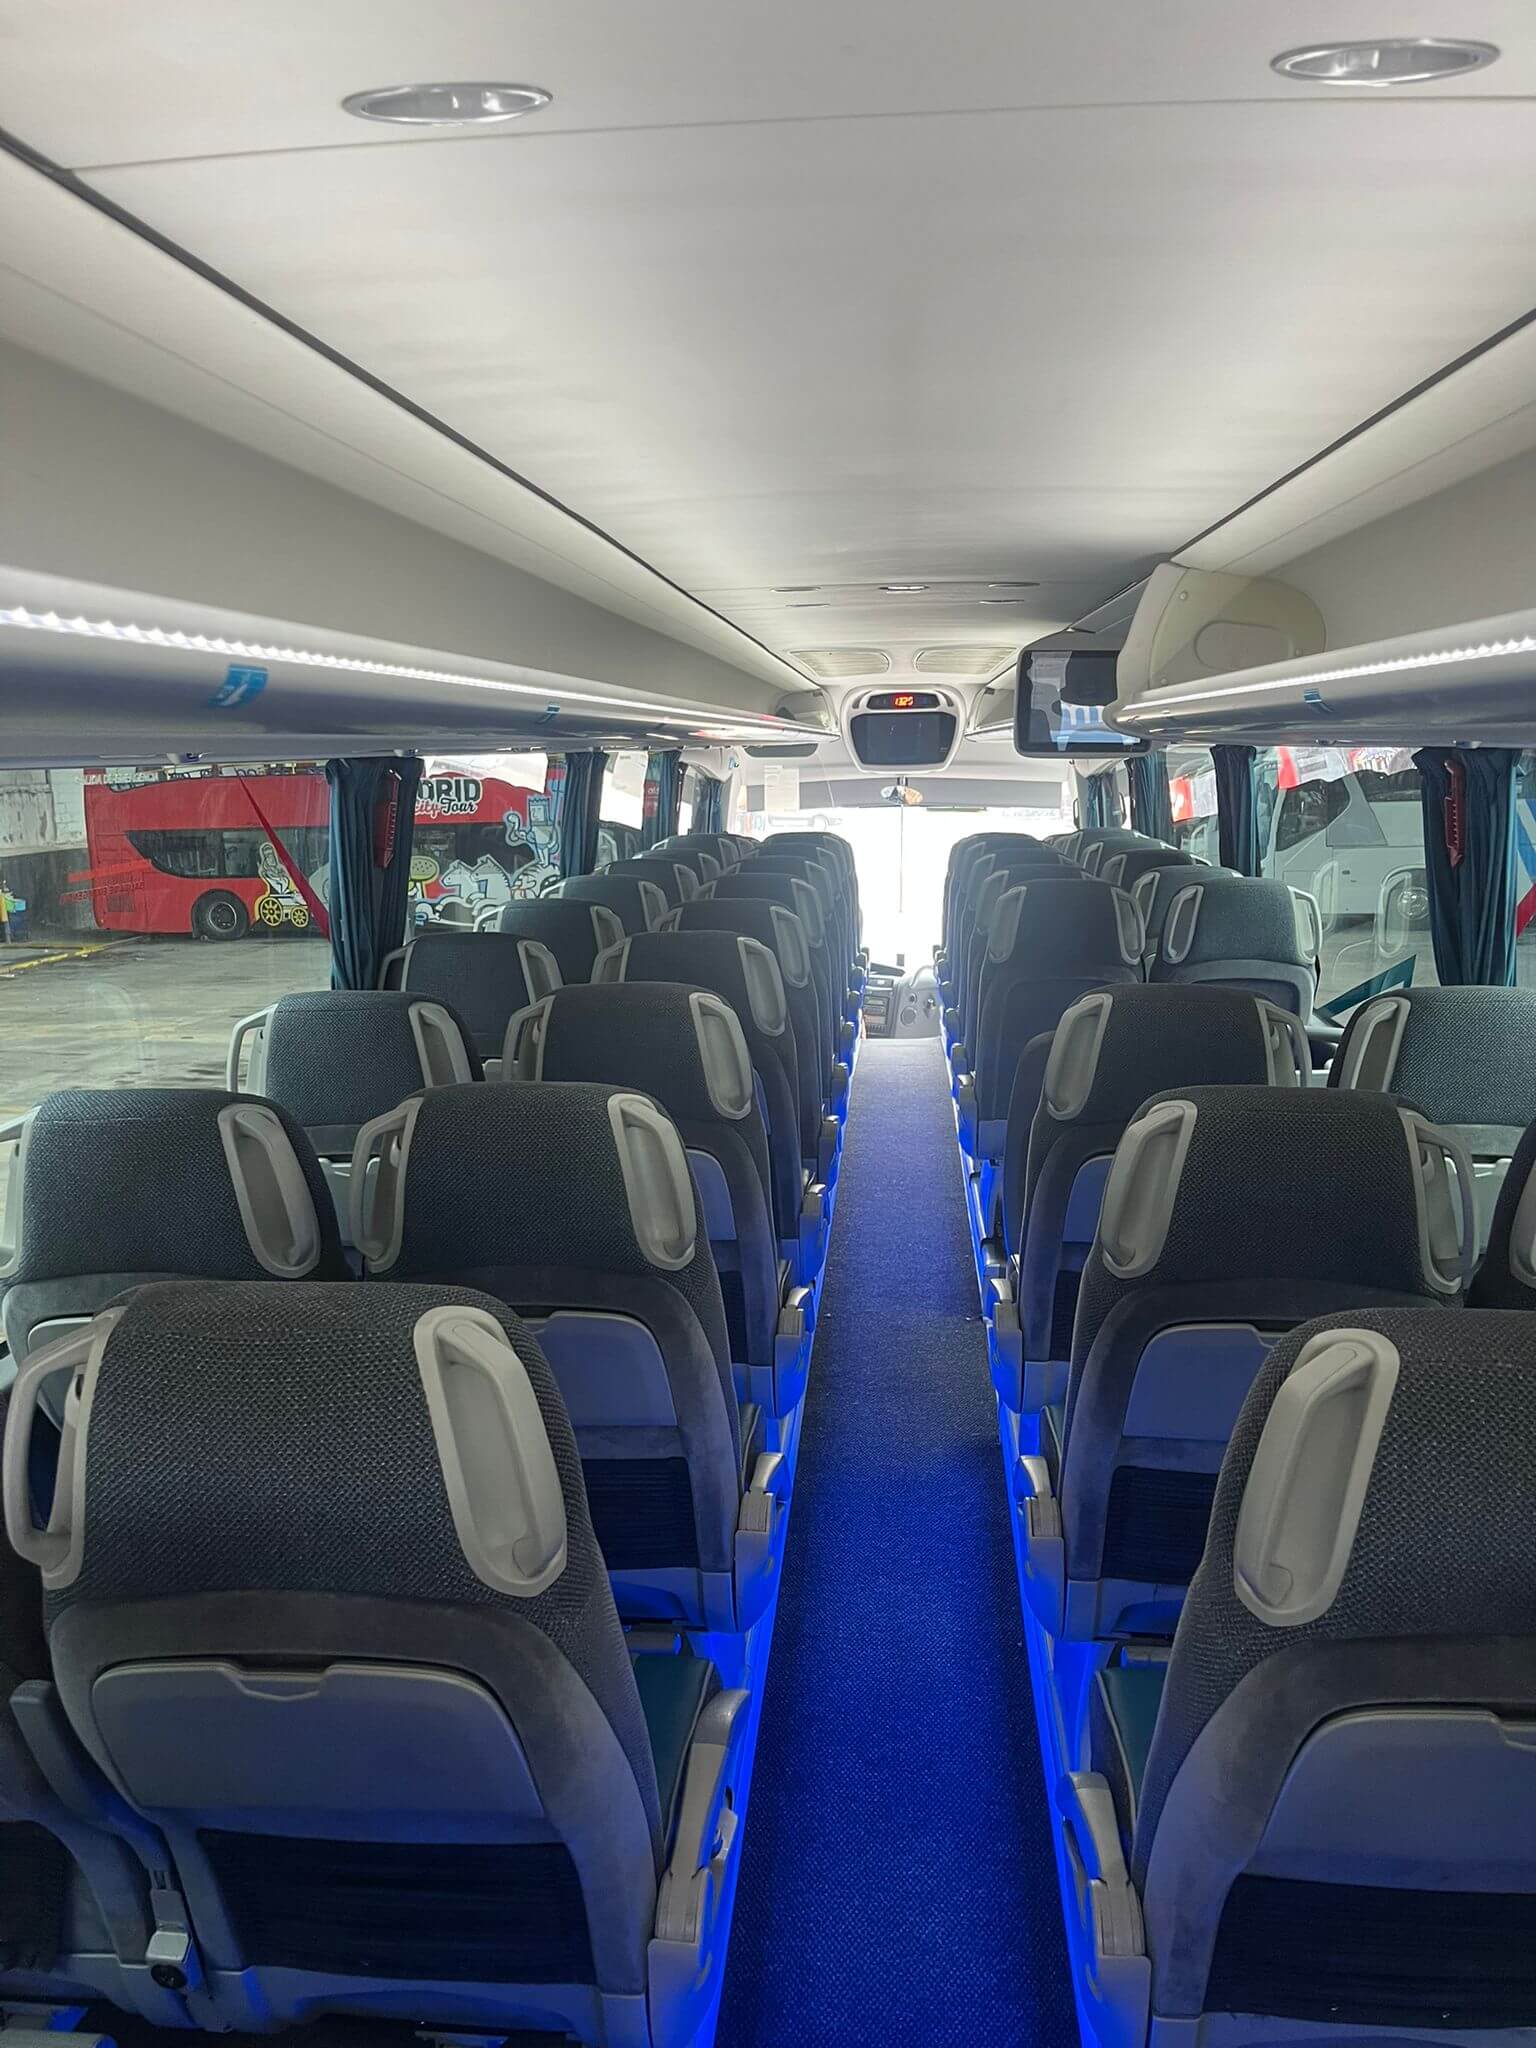 Rent a 55 seater Luxury VIP Coach (IRIZAR I6 i6 2018) from Bus Banet from Madrid 